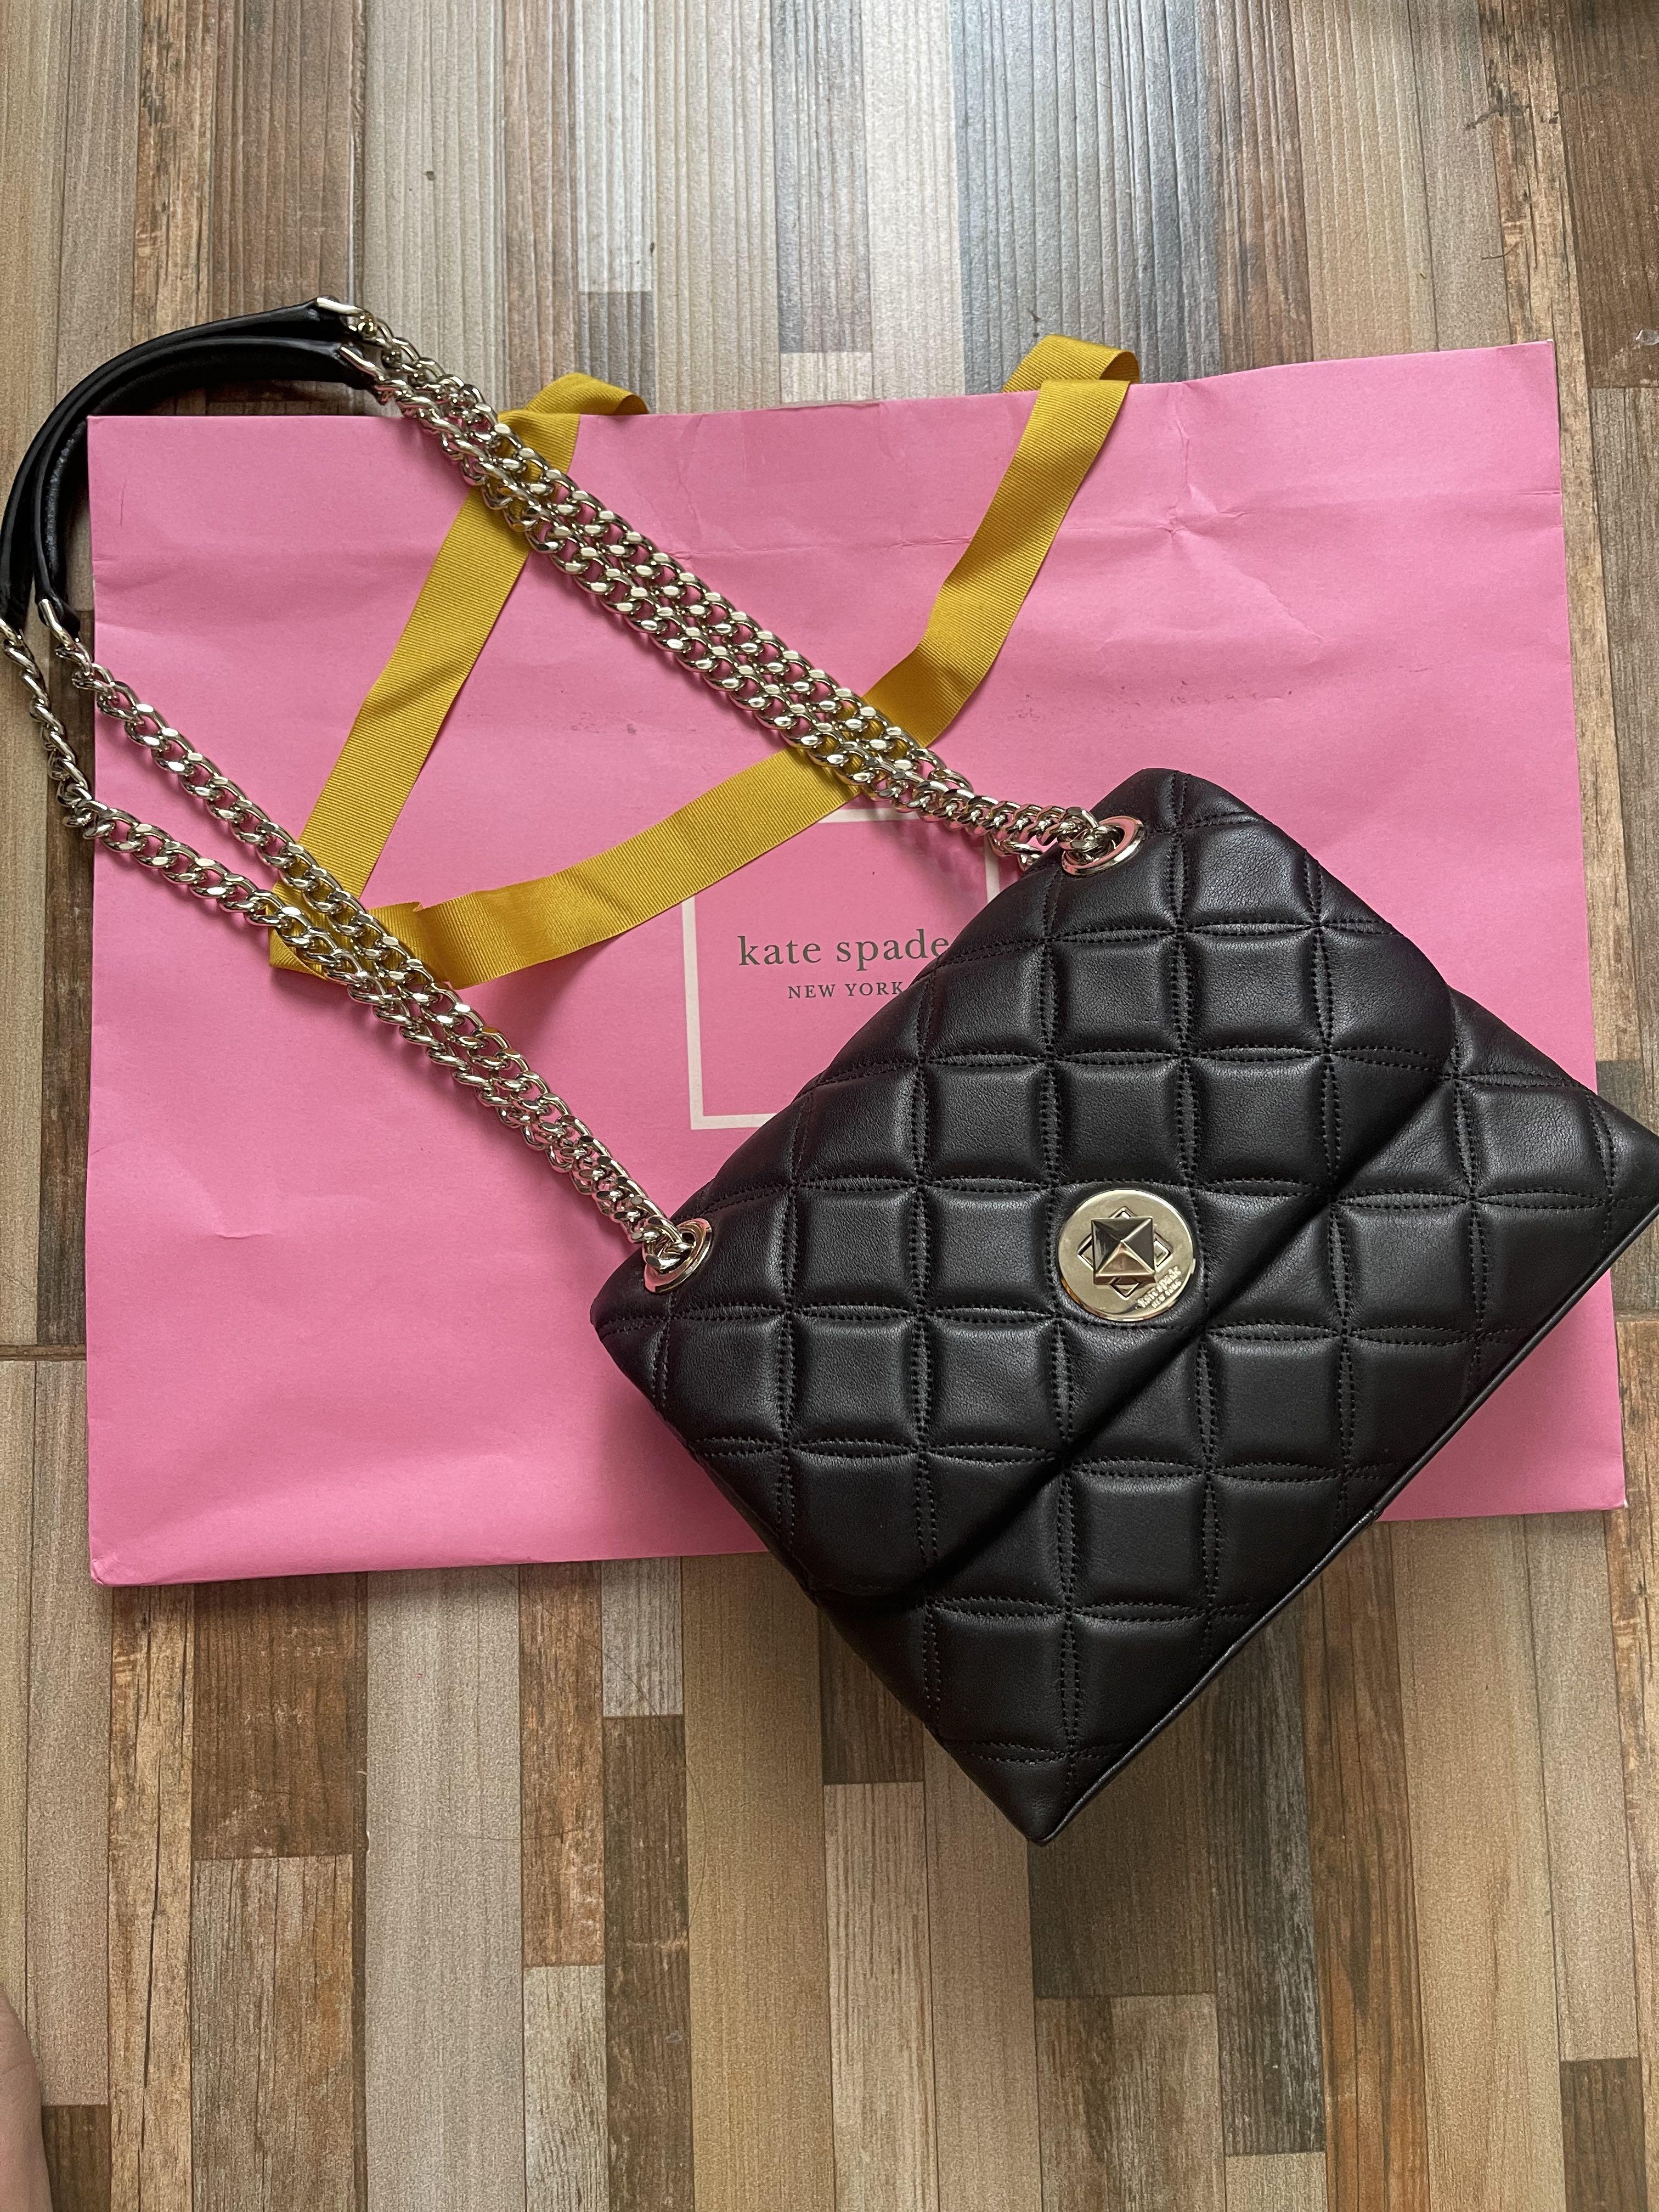 Top more than 80 kate spade quilted chain bag super hot - in.cdgdbentre